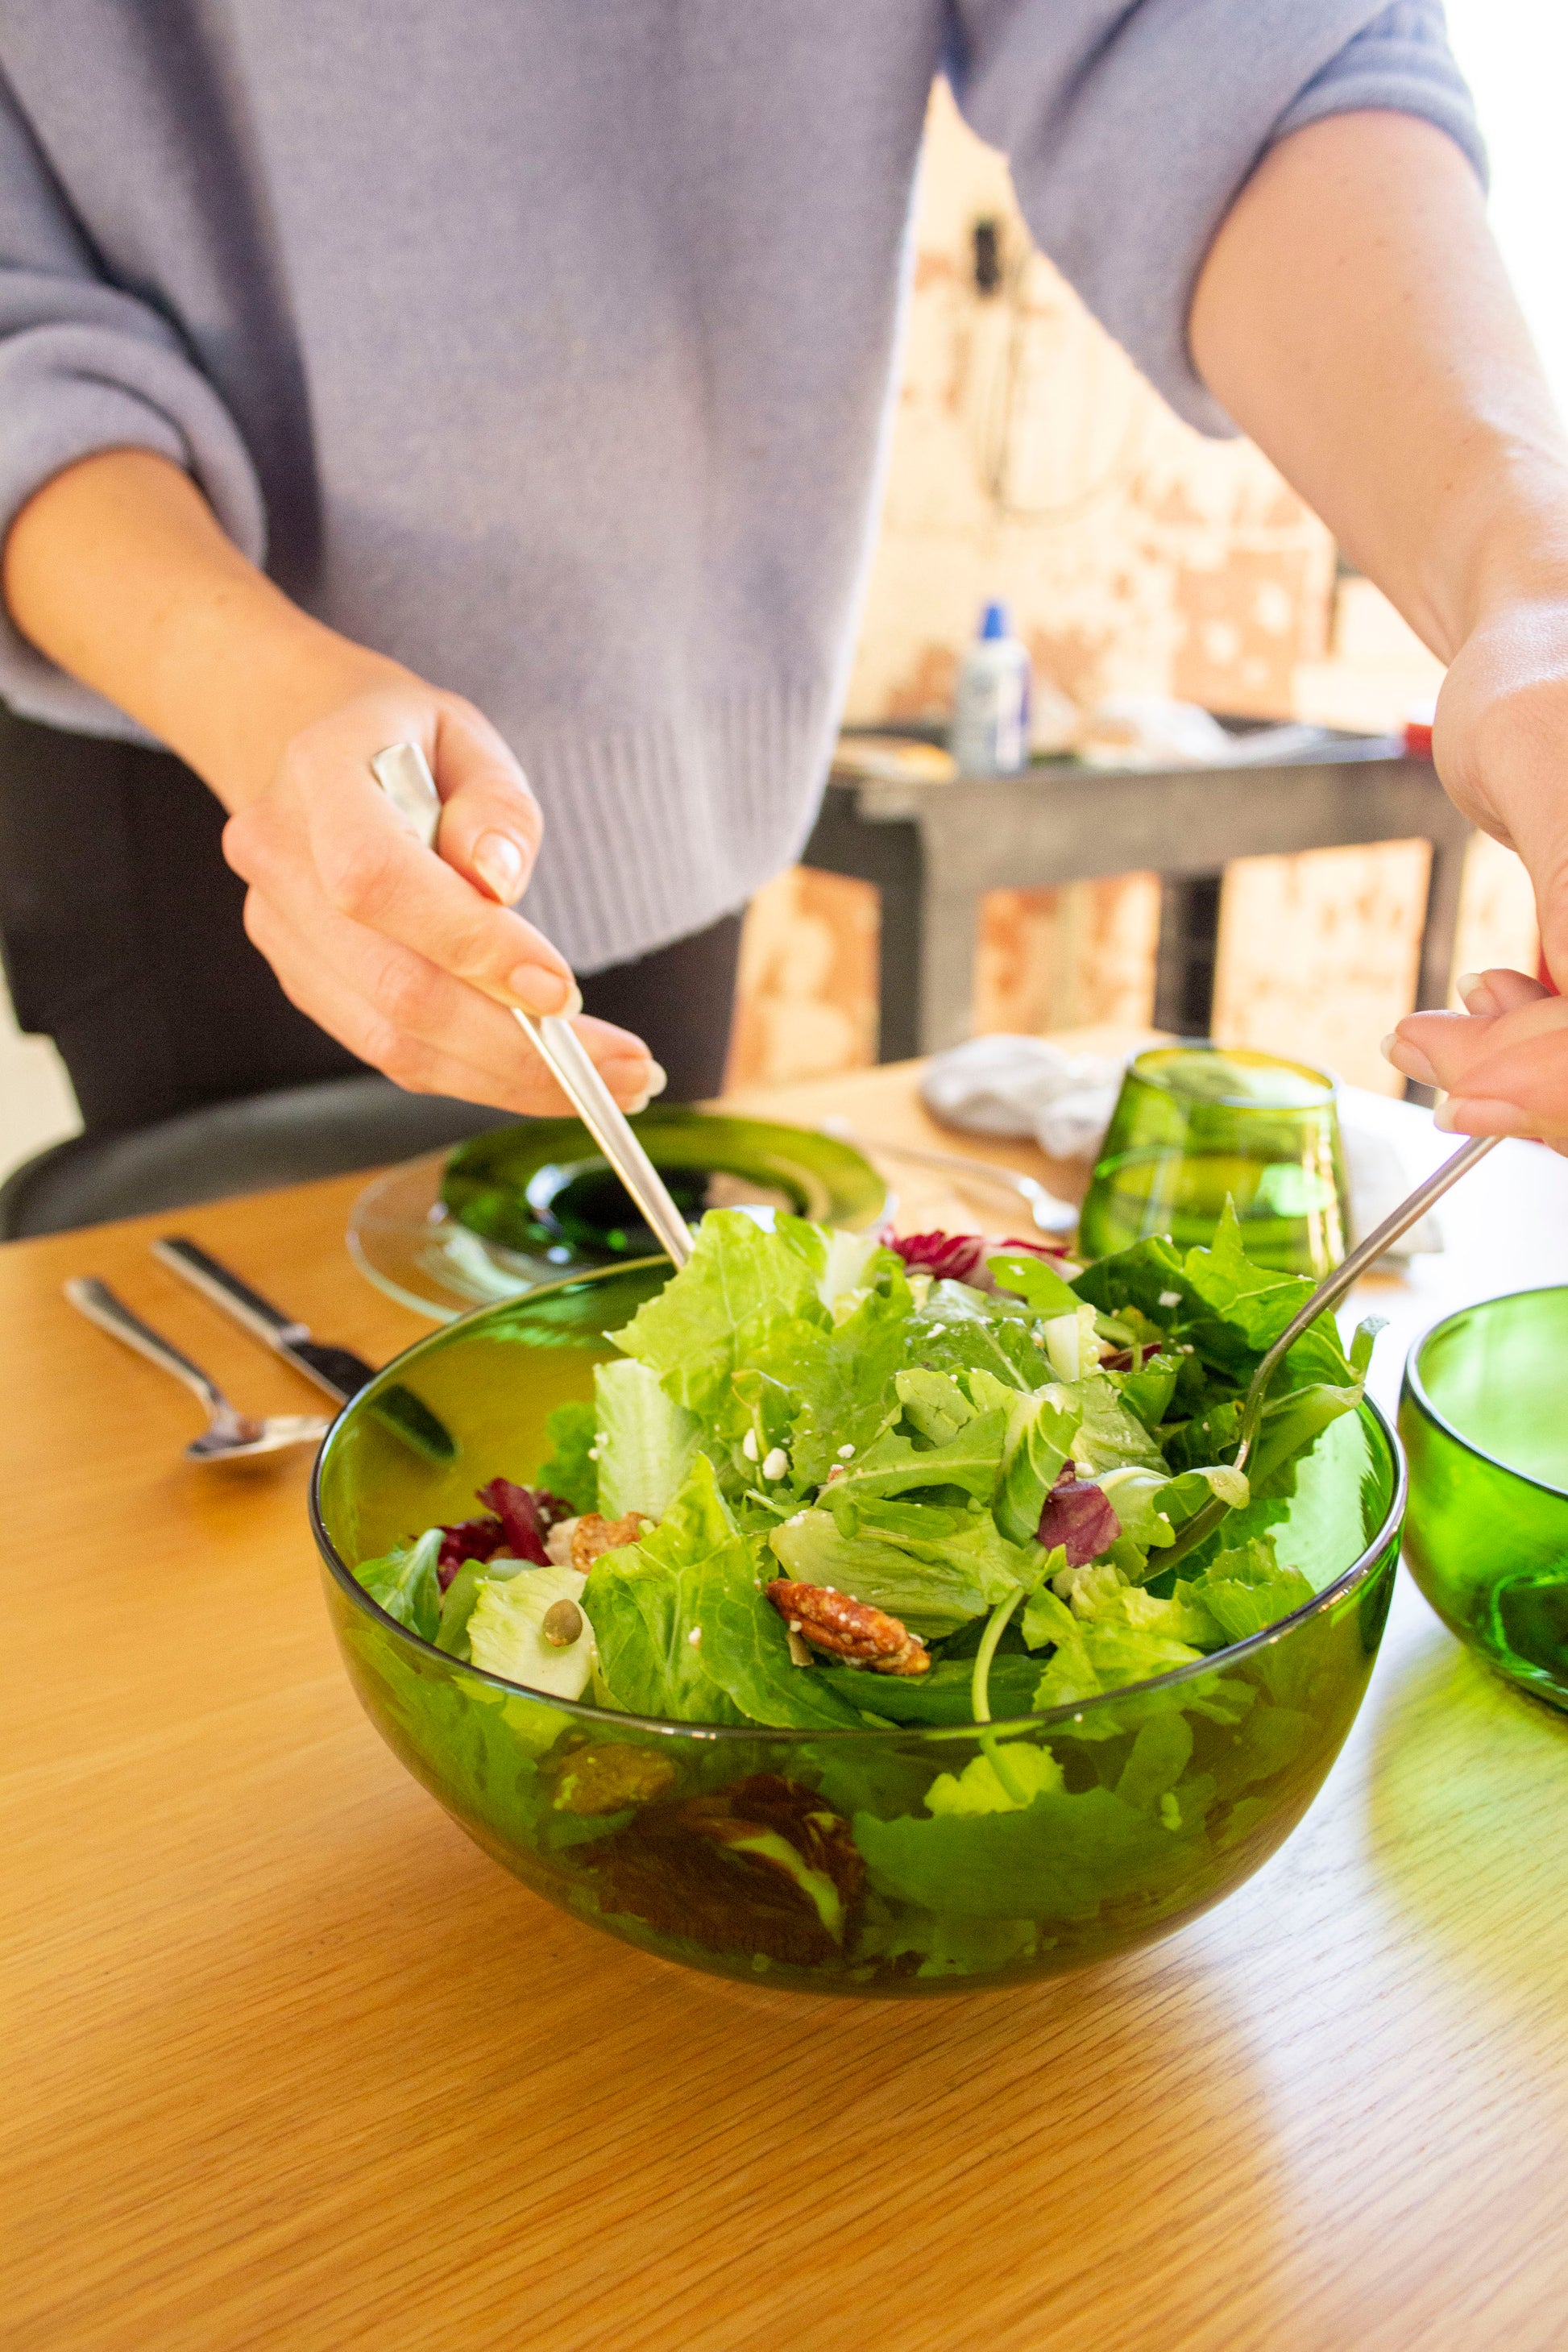 A person serving salad from a large nesting bowl made from an emerald recycled bottle